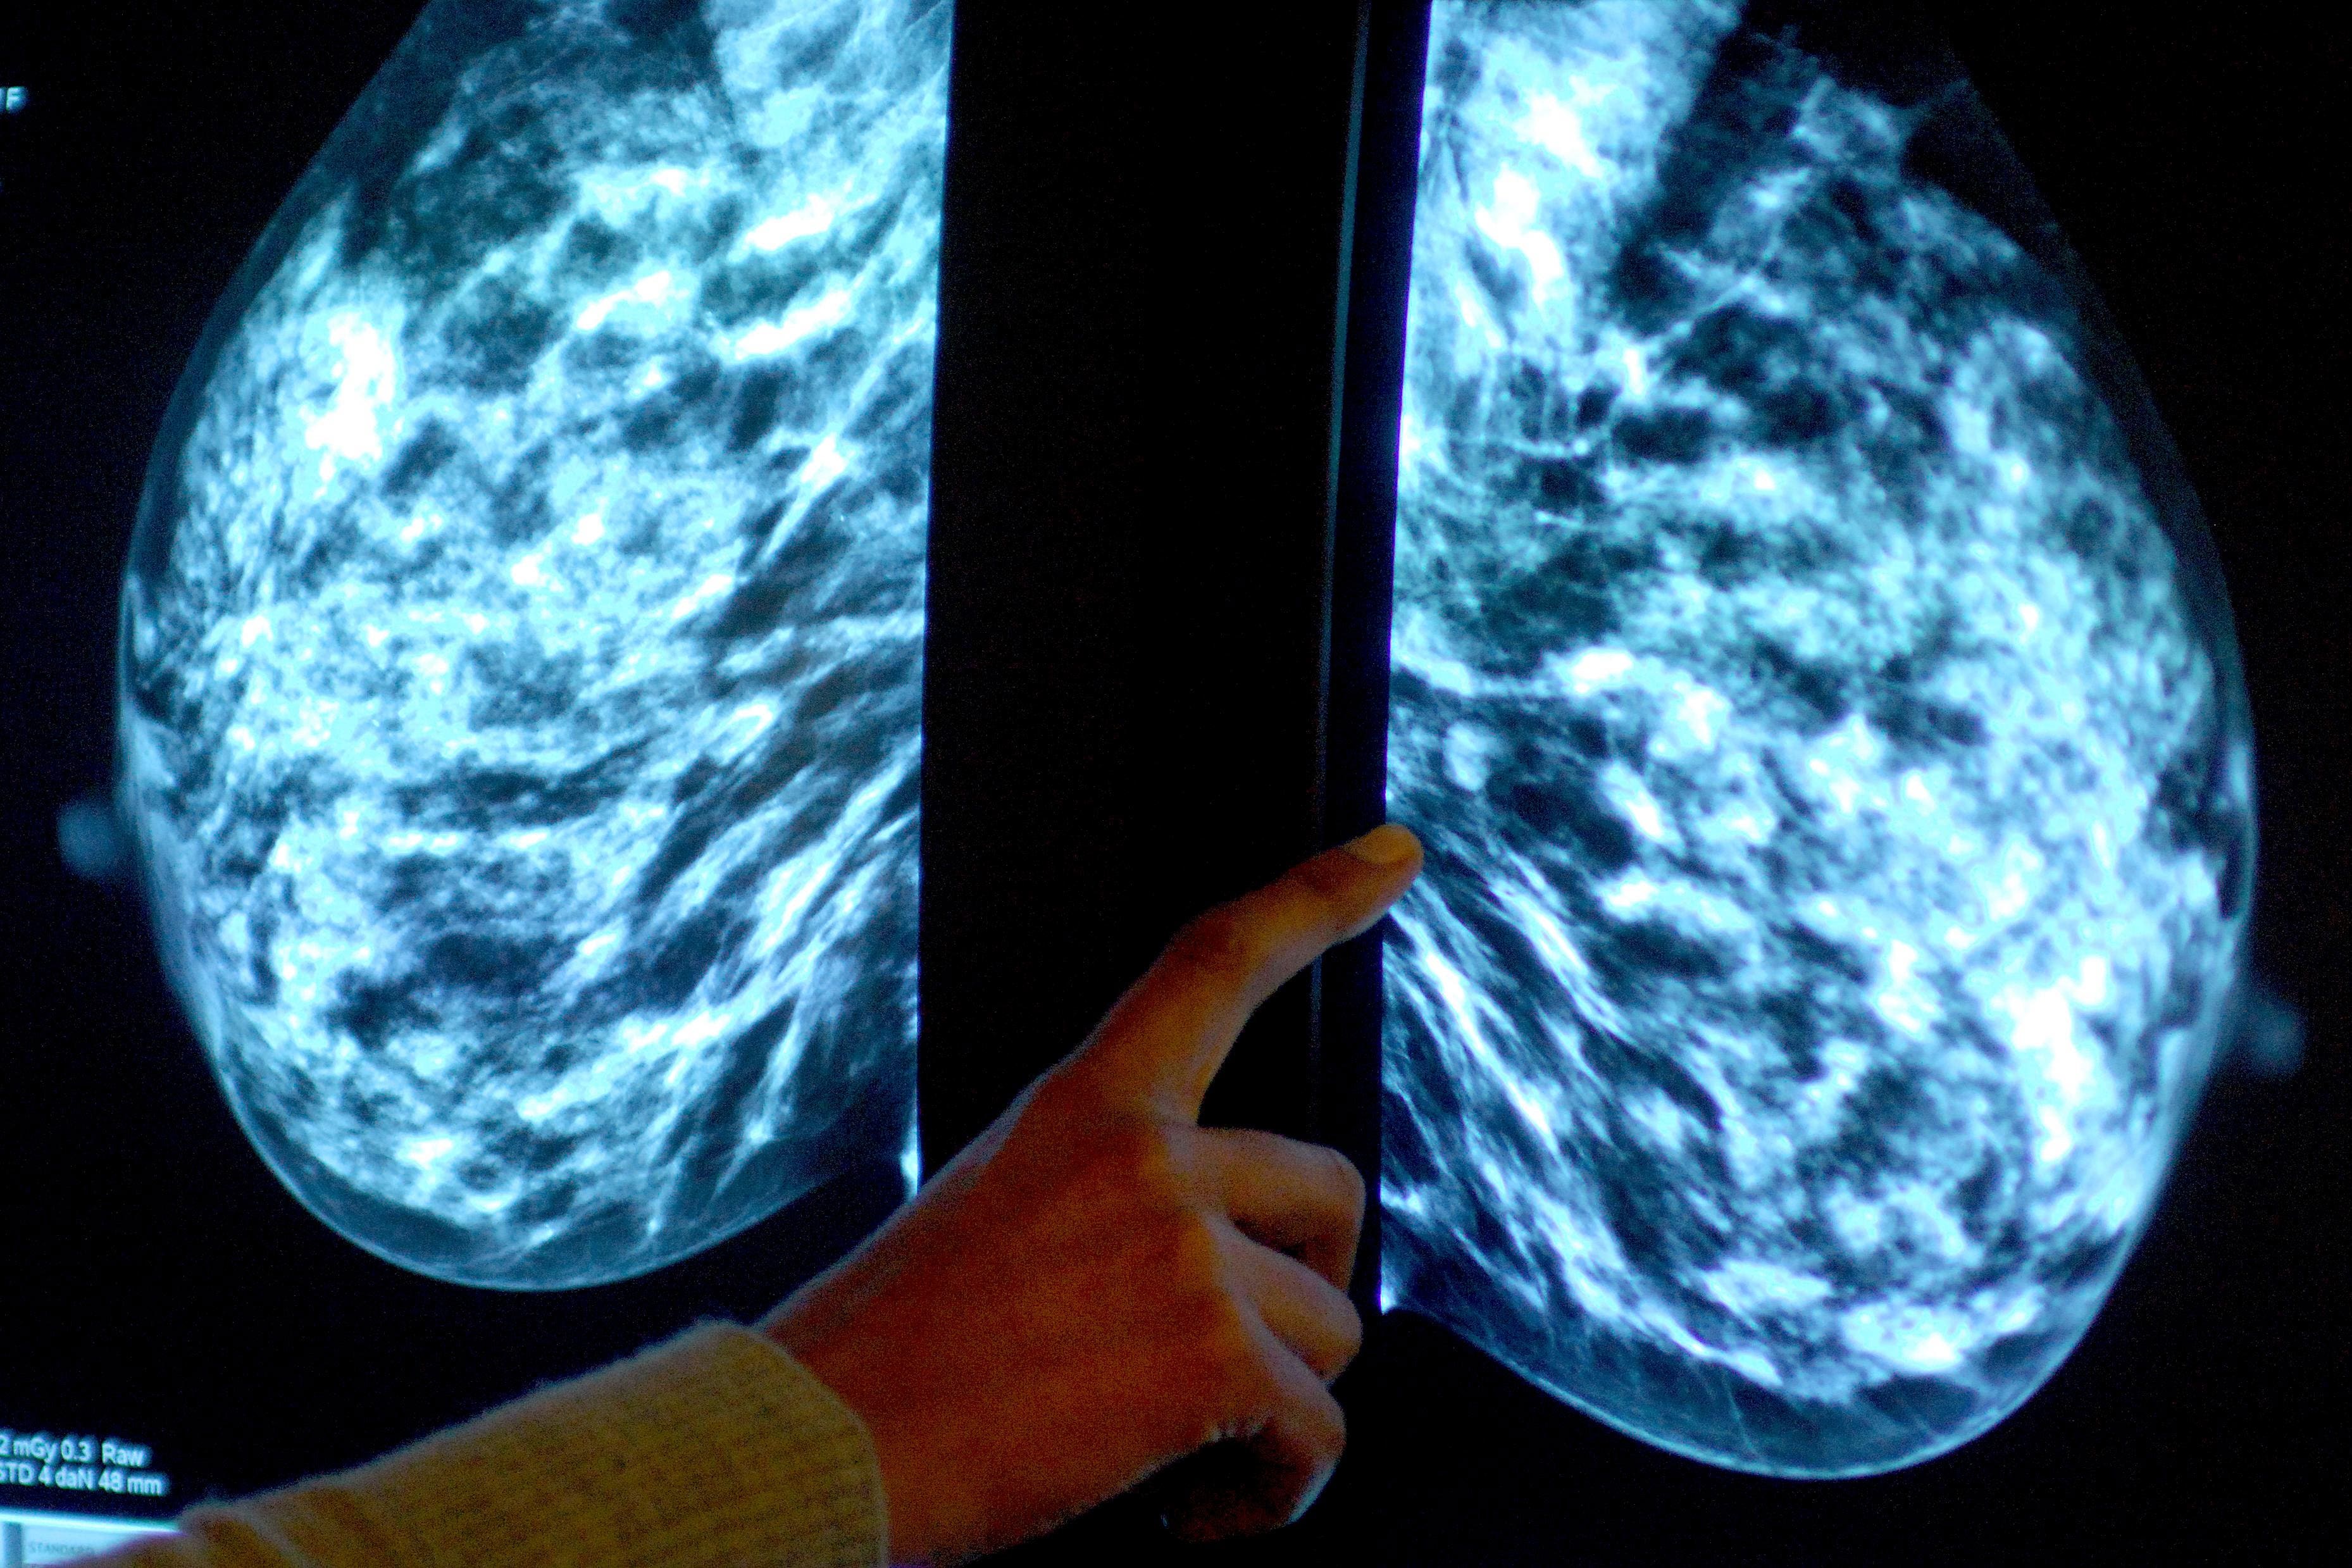 Over 1,000 people dying from breast cancer every month in the UK